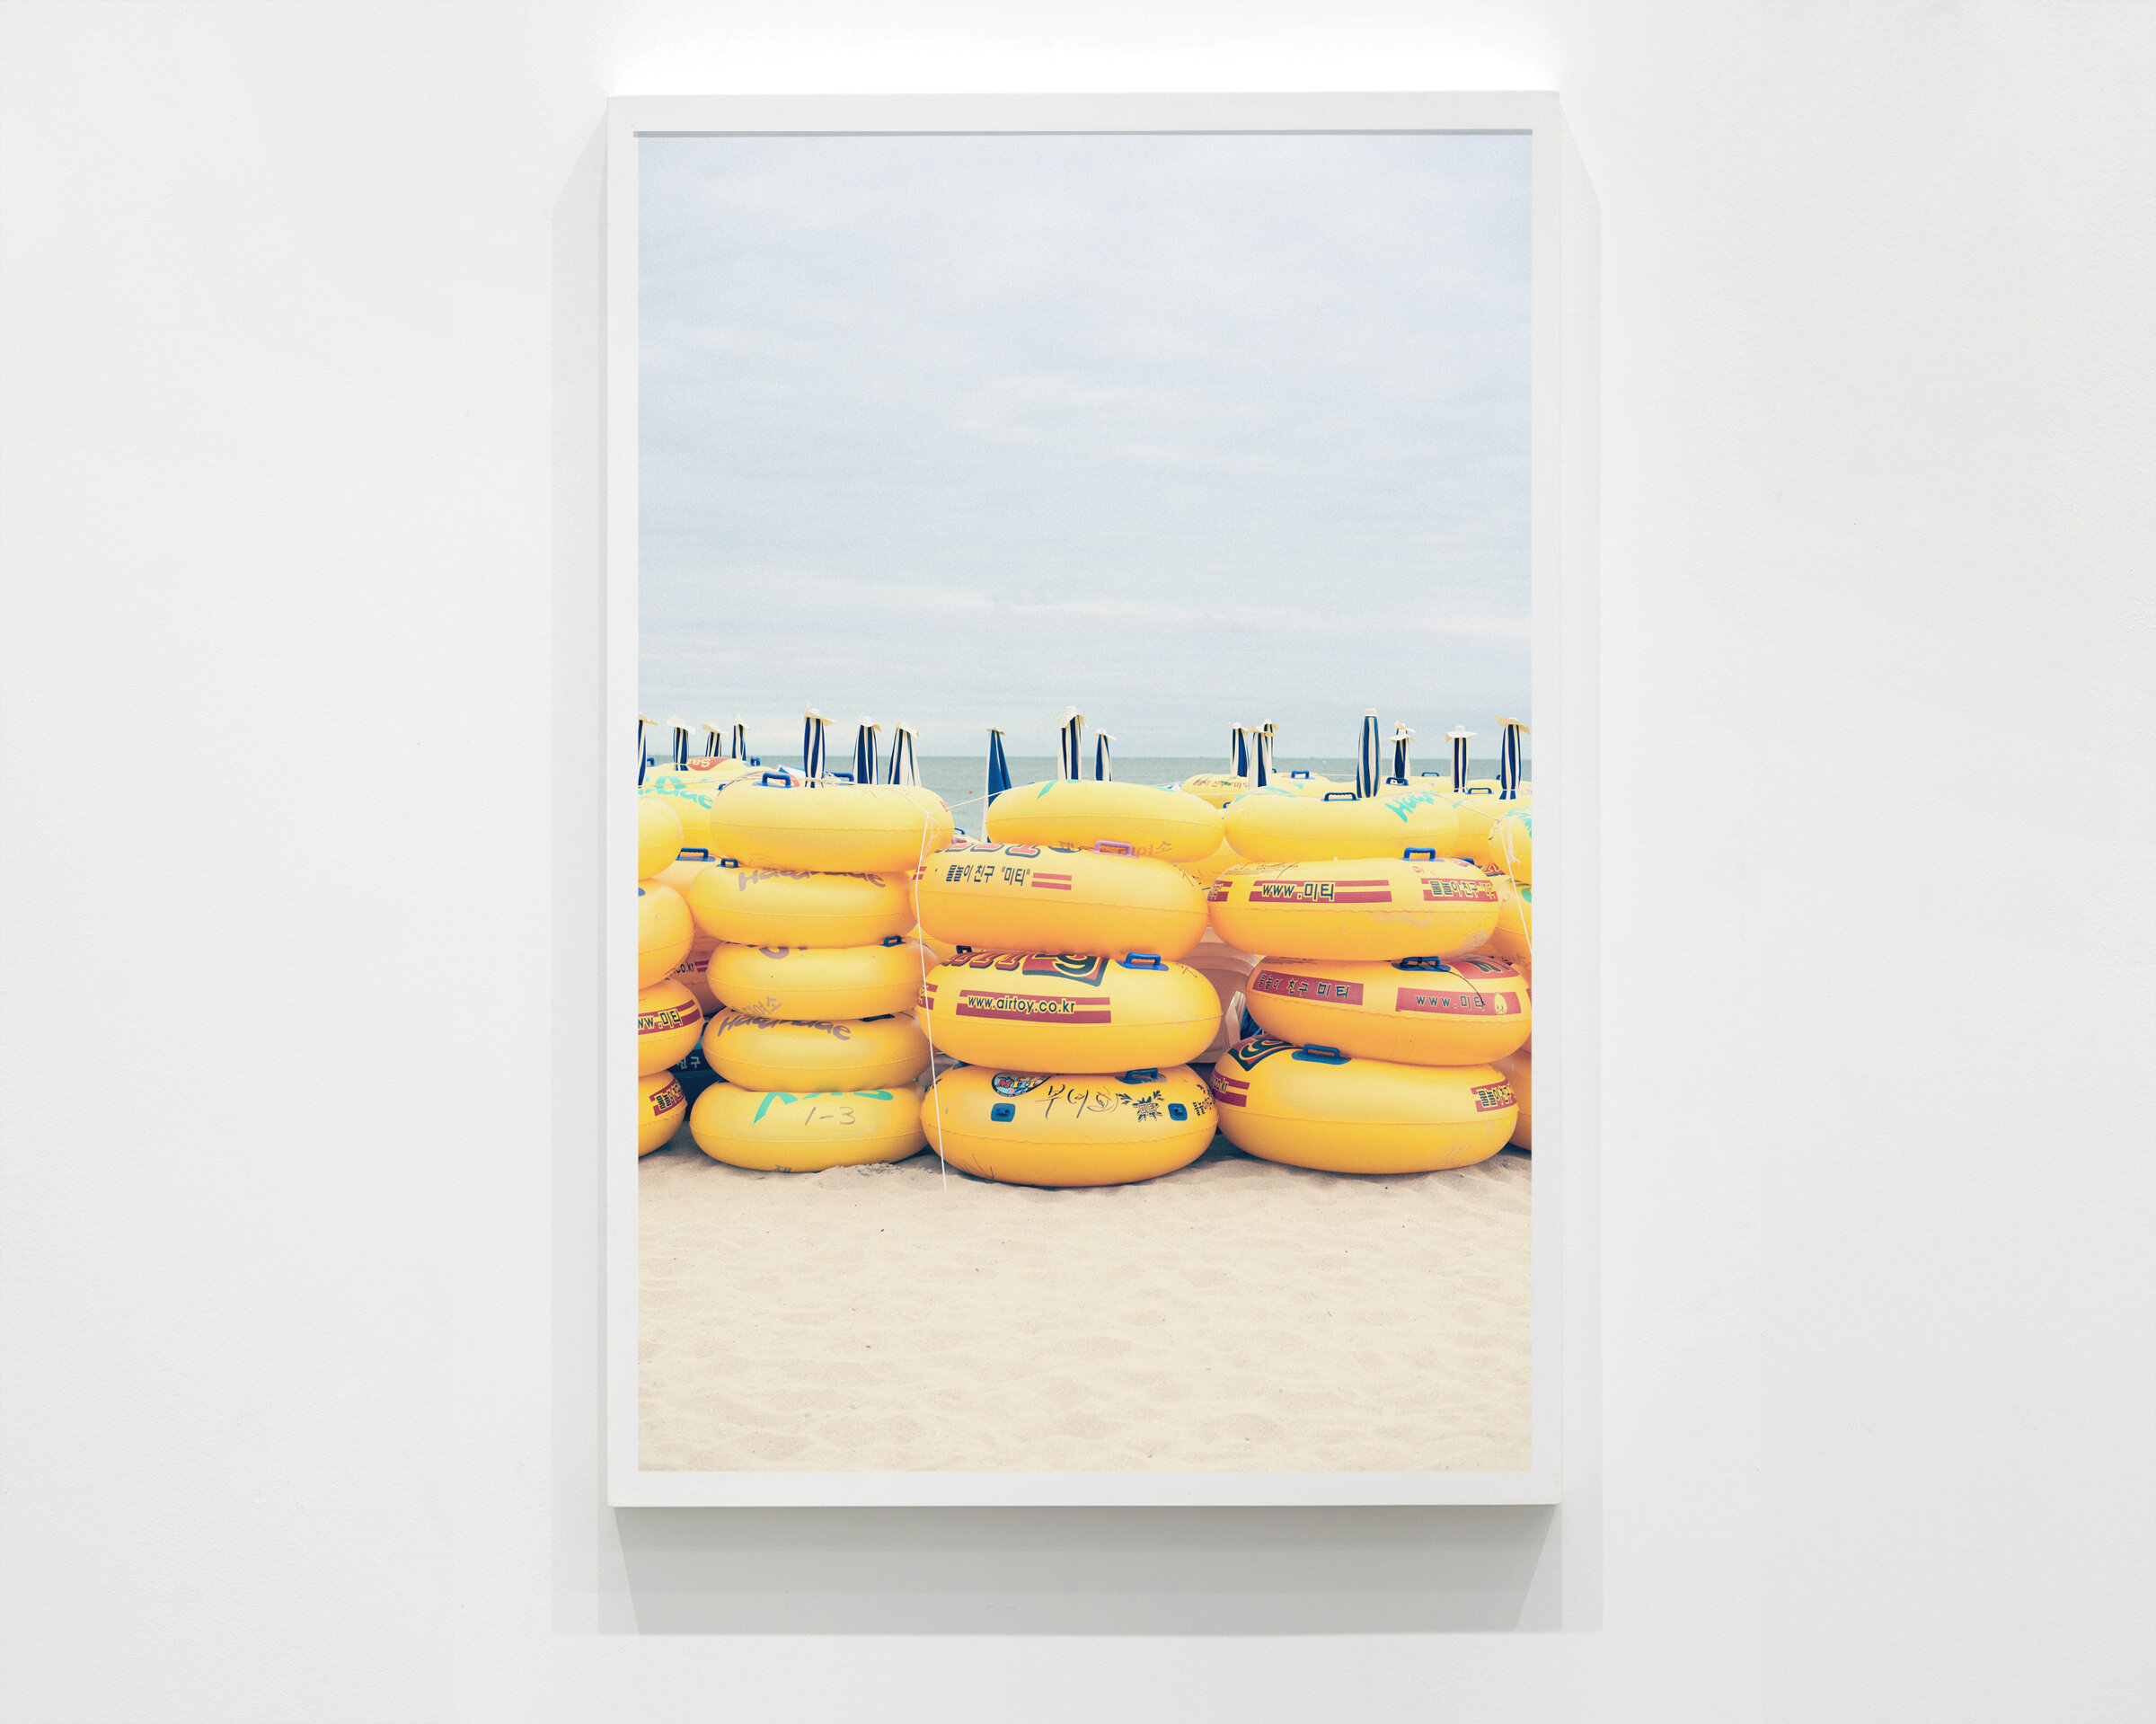  Pacific Distance (Busan #1), 2009  36 x 24 in (91.44 x 60.96 cm) 